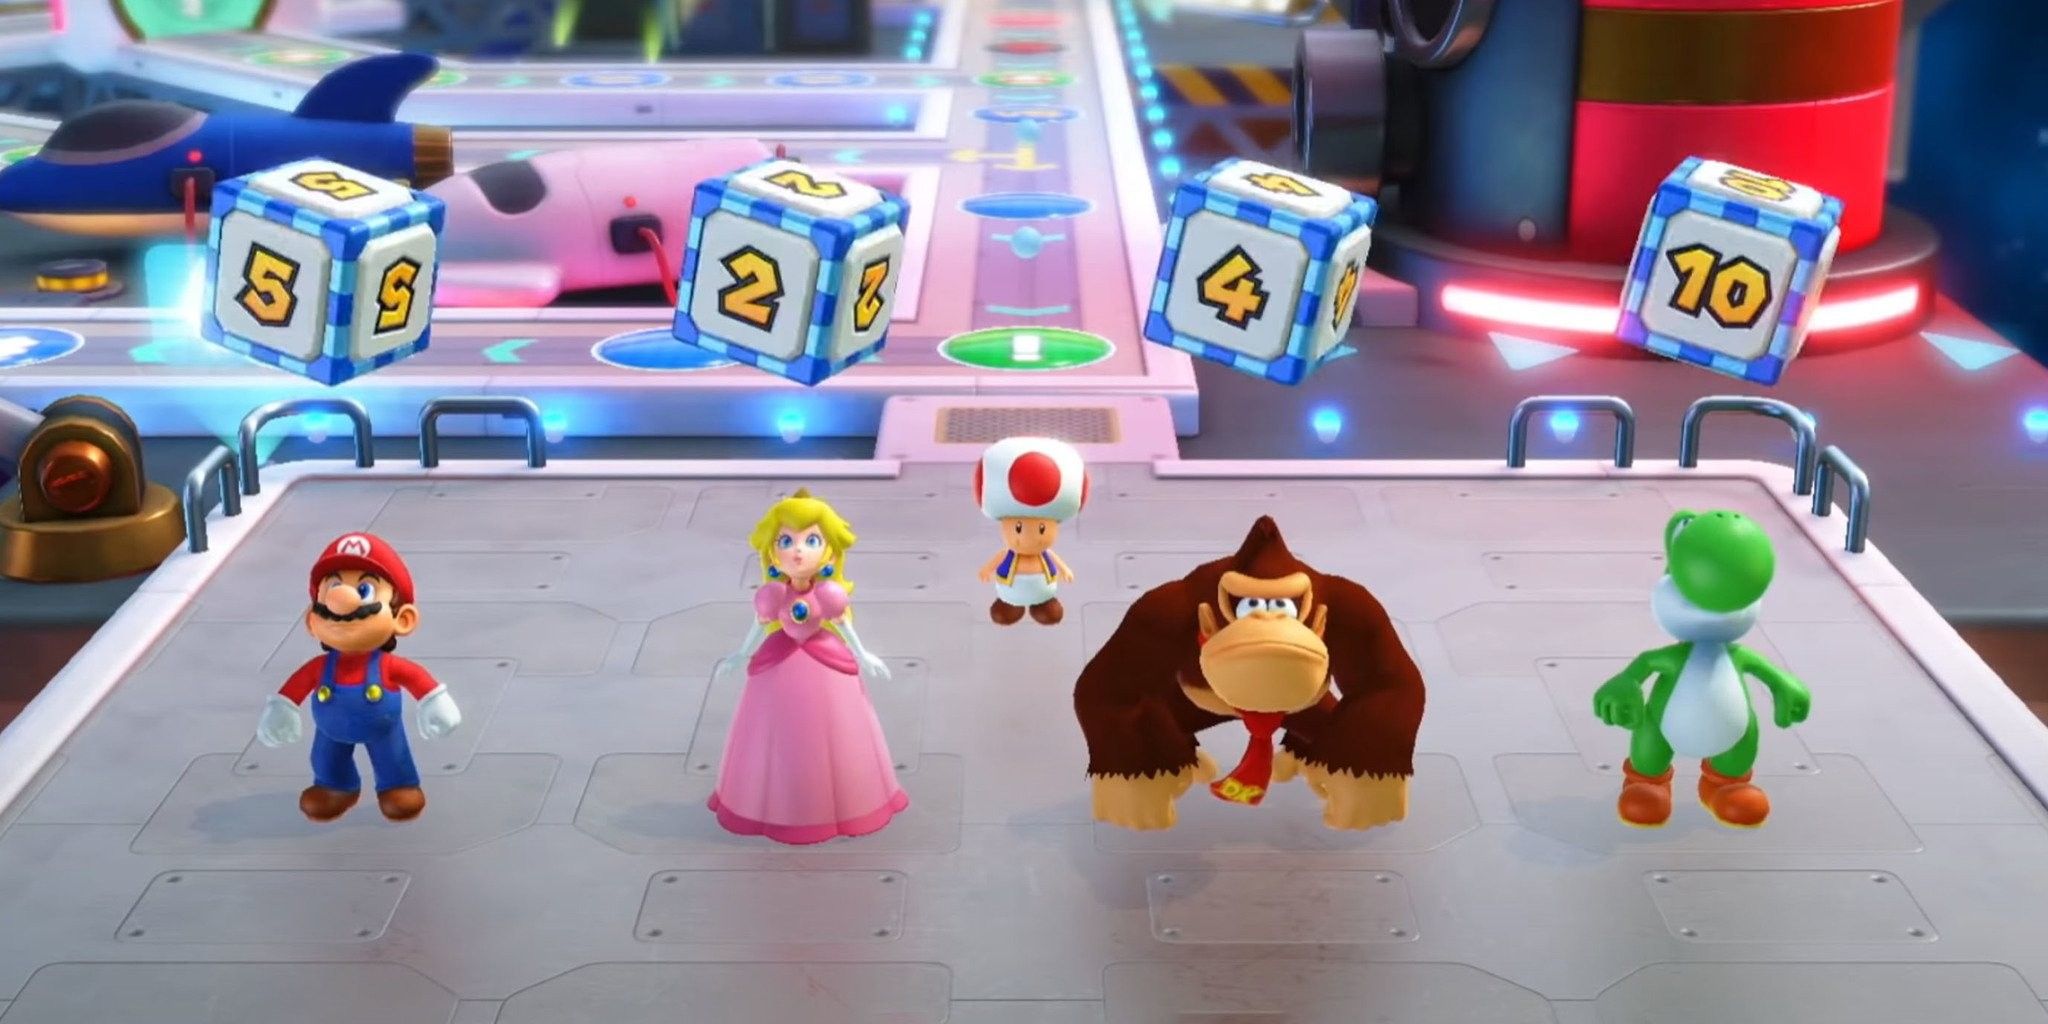 Mario Party Superstars players roll the dice